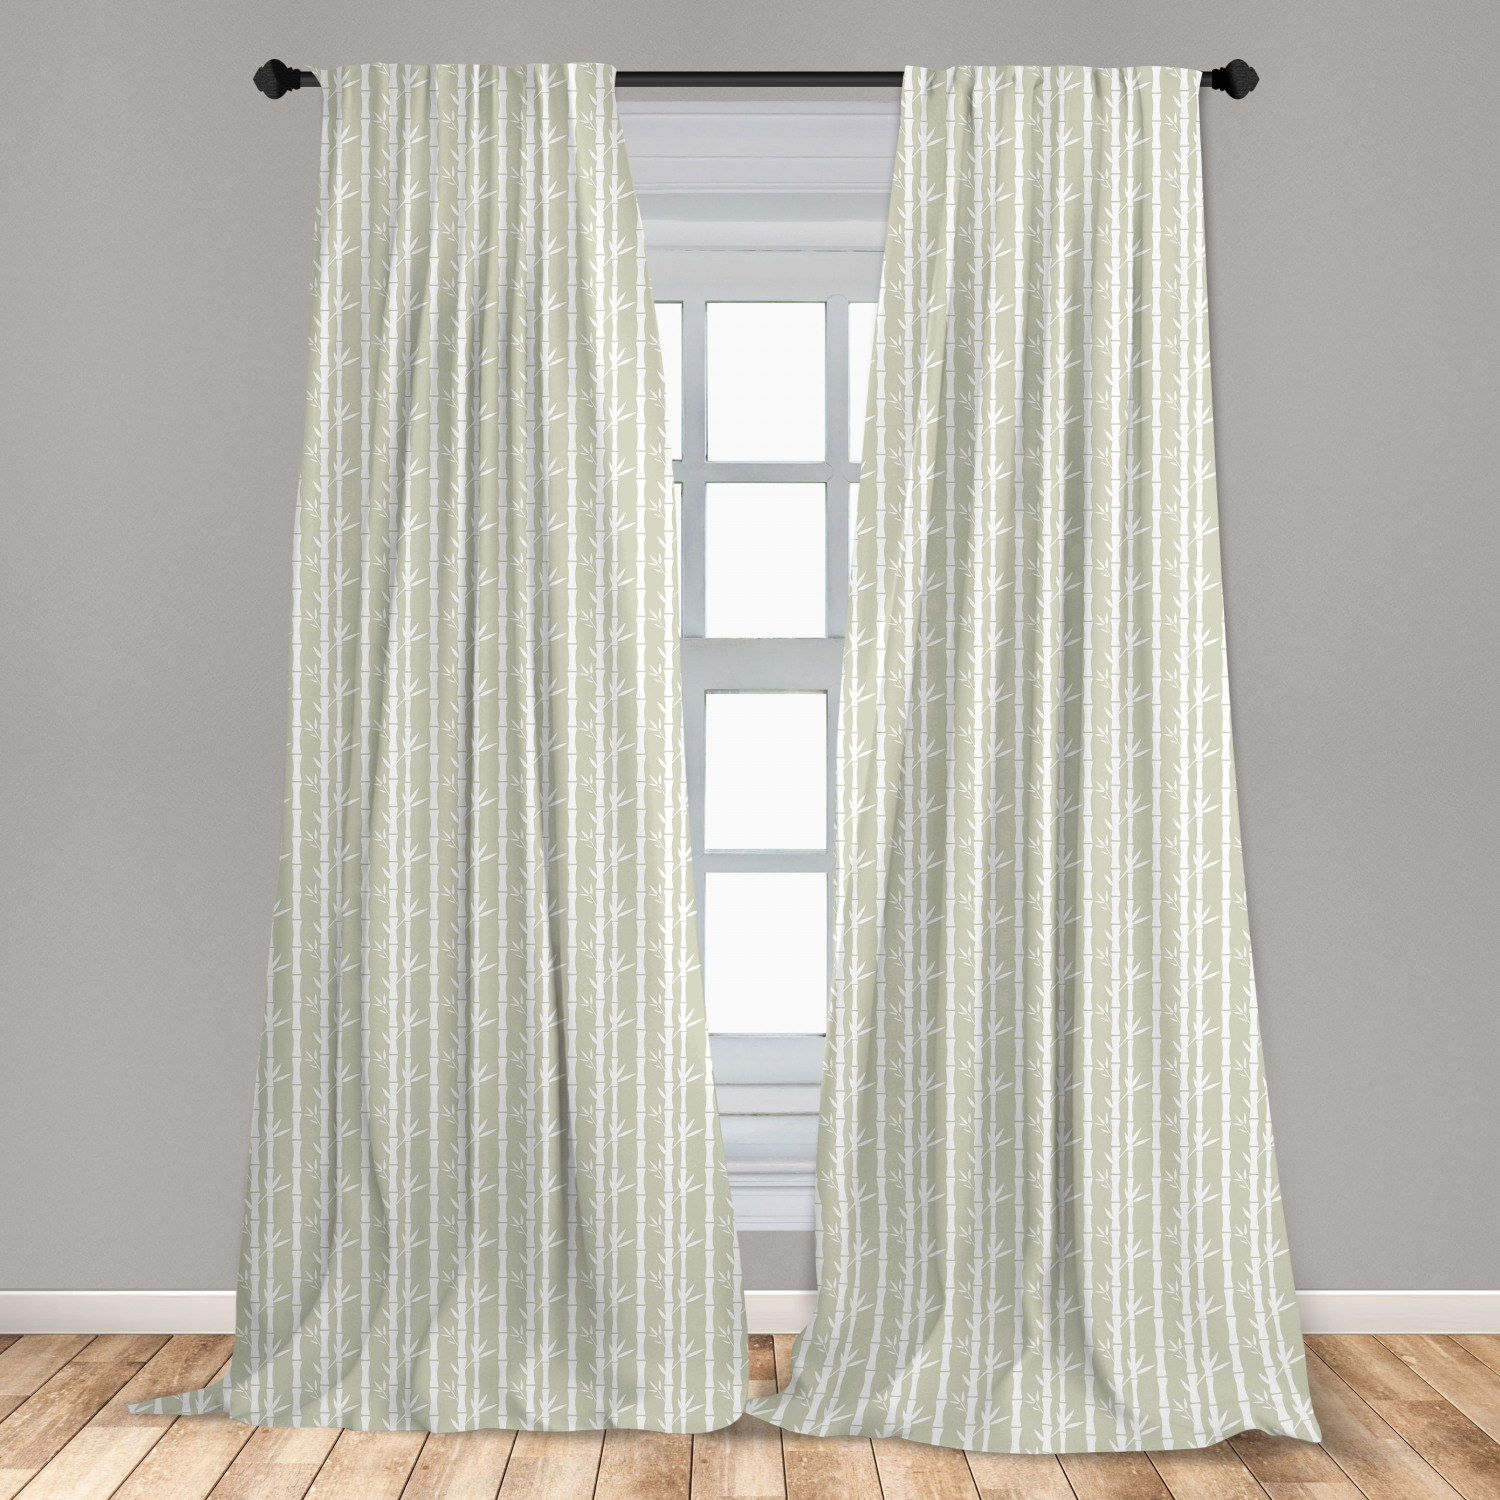 Tropic Microfiber Curtains 2 Panel Set Living Room Bedroom in 3 Sizes 